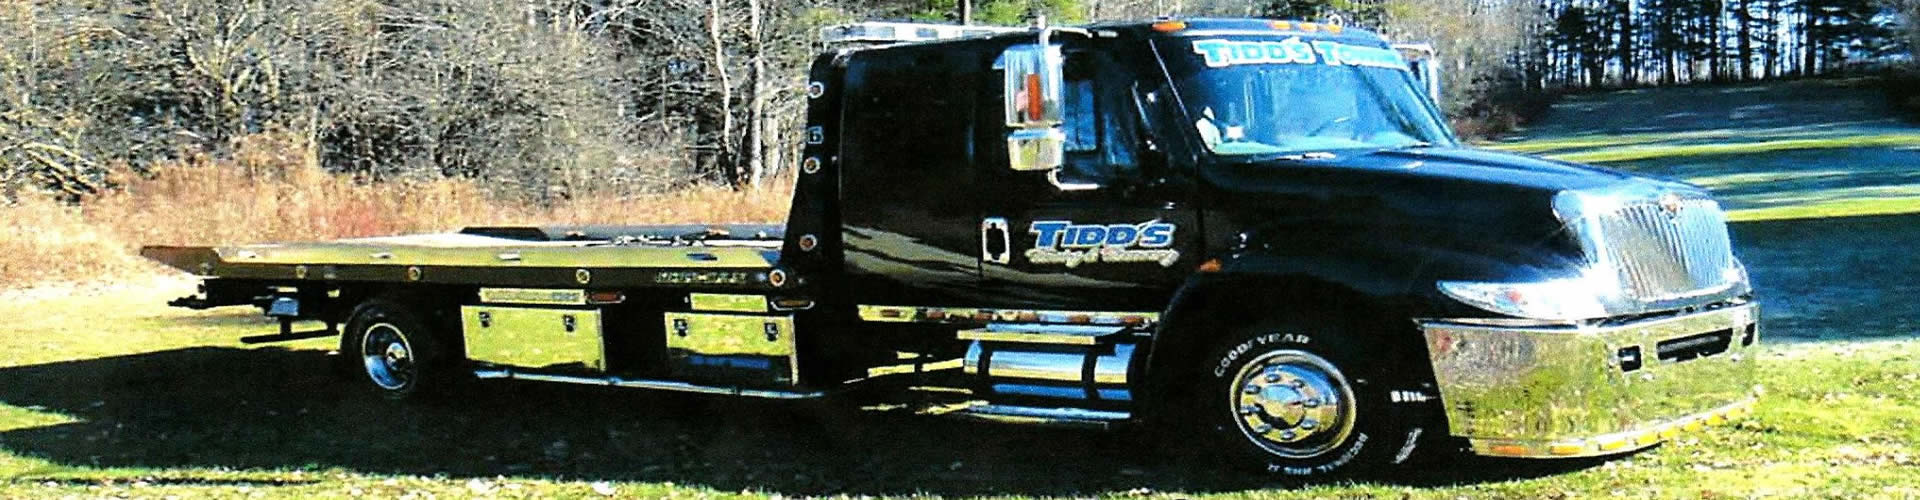 tidds towing pic